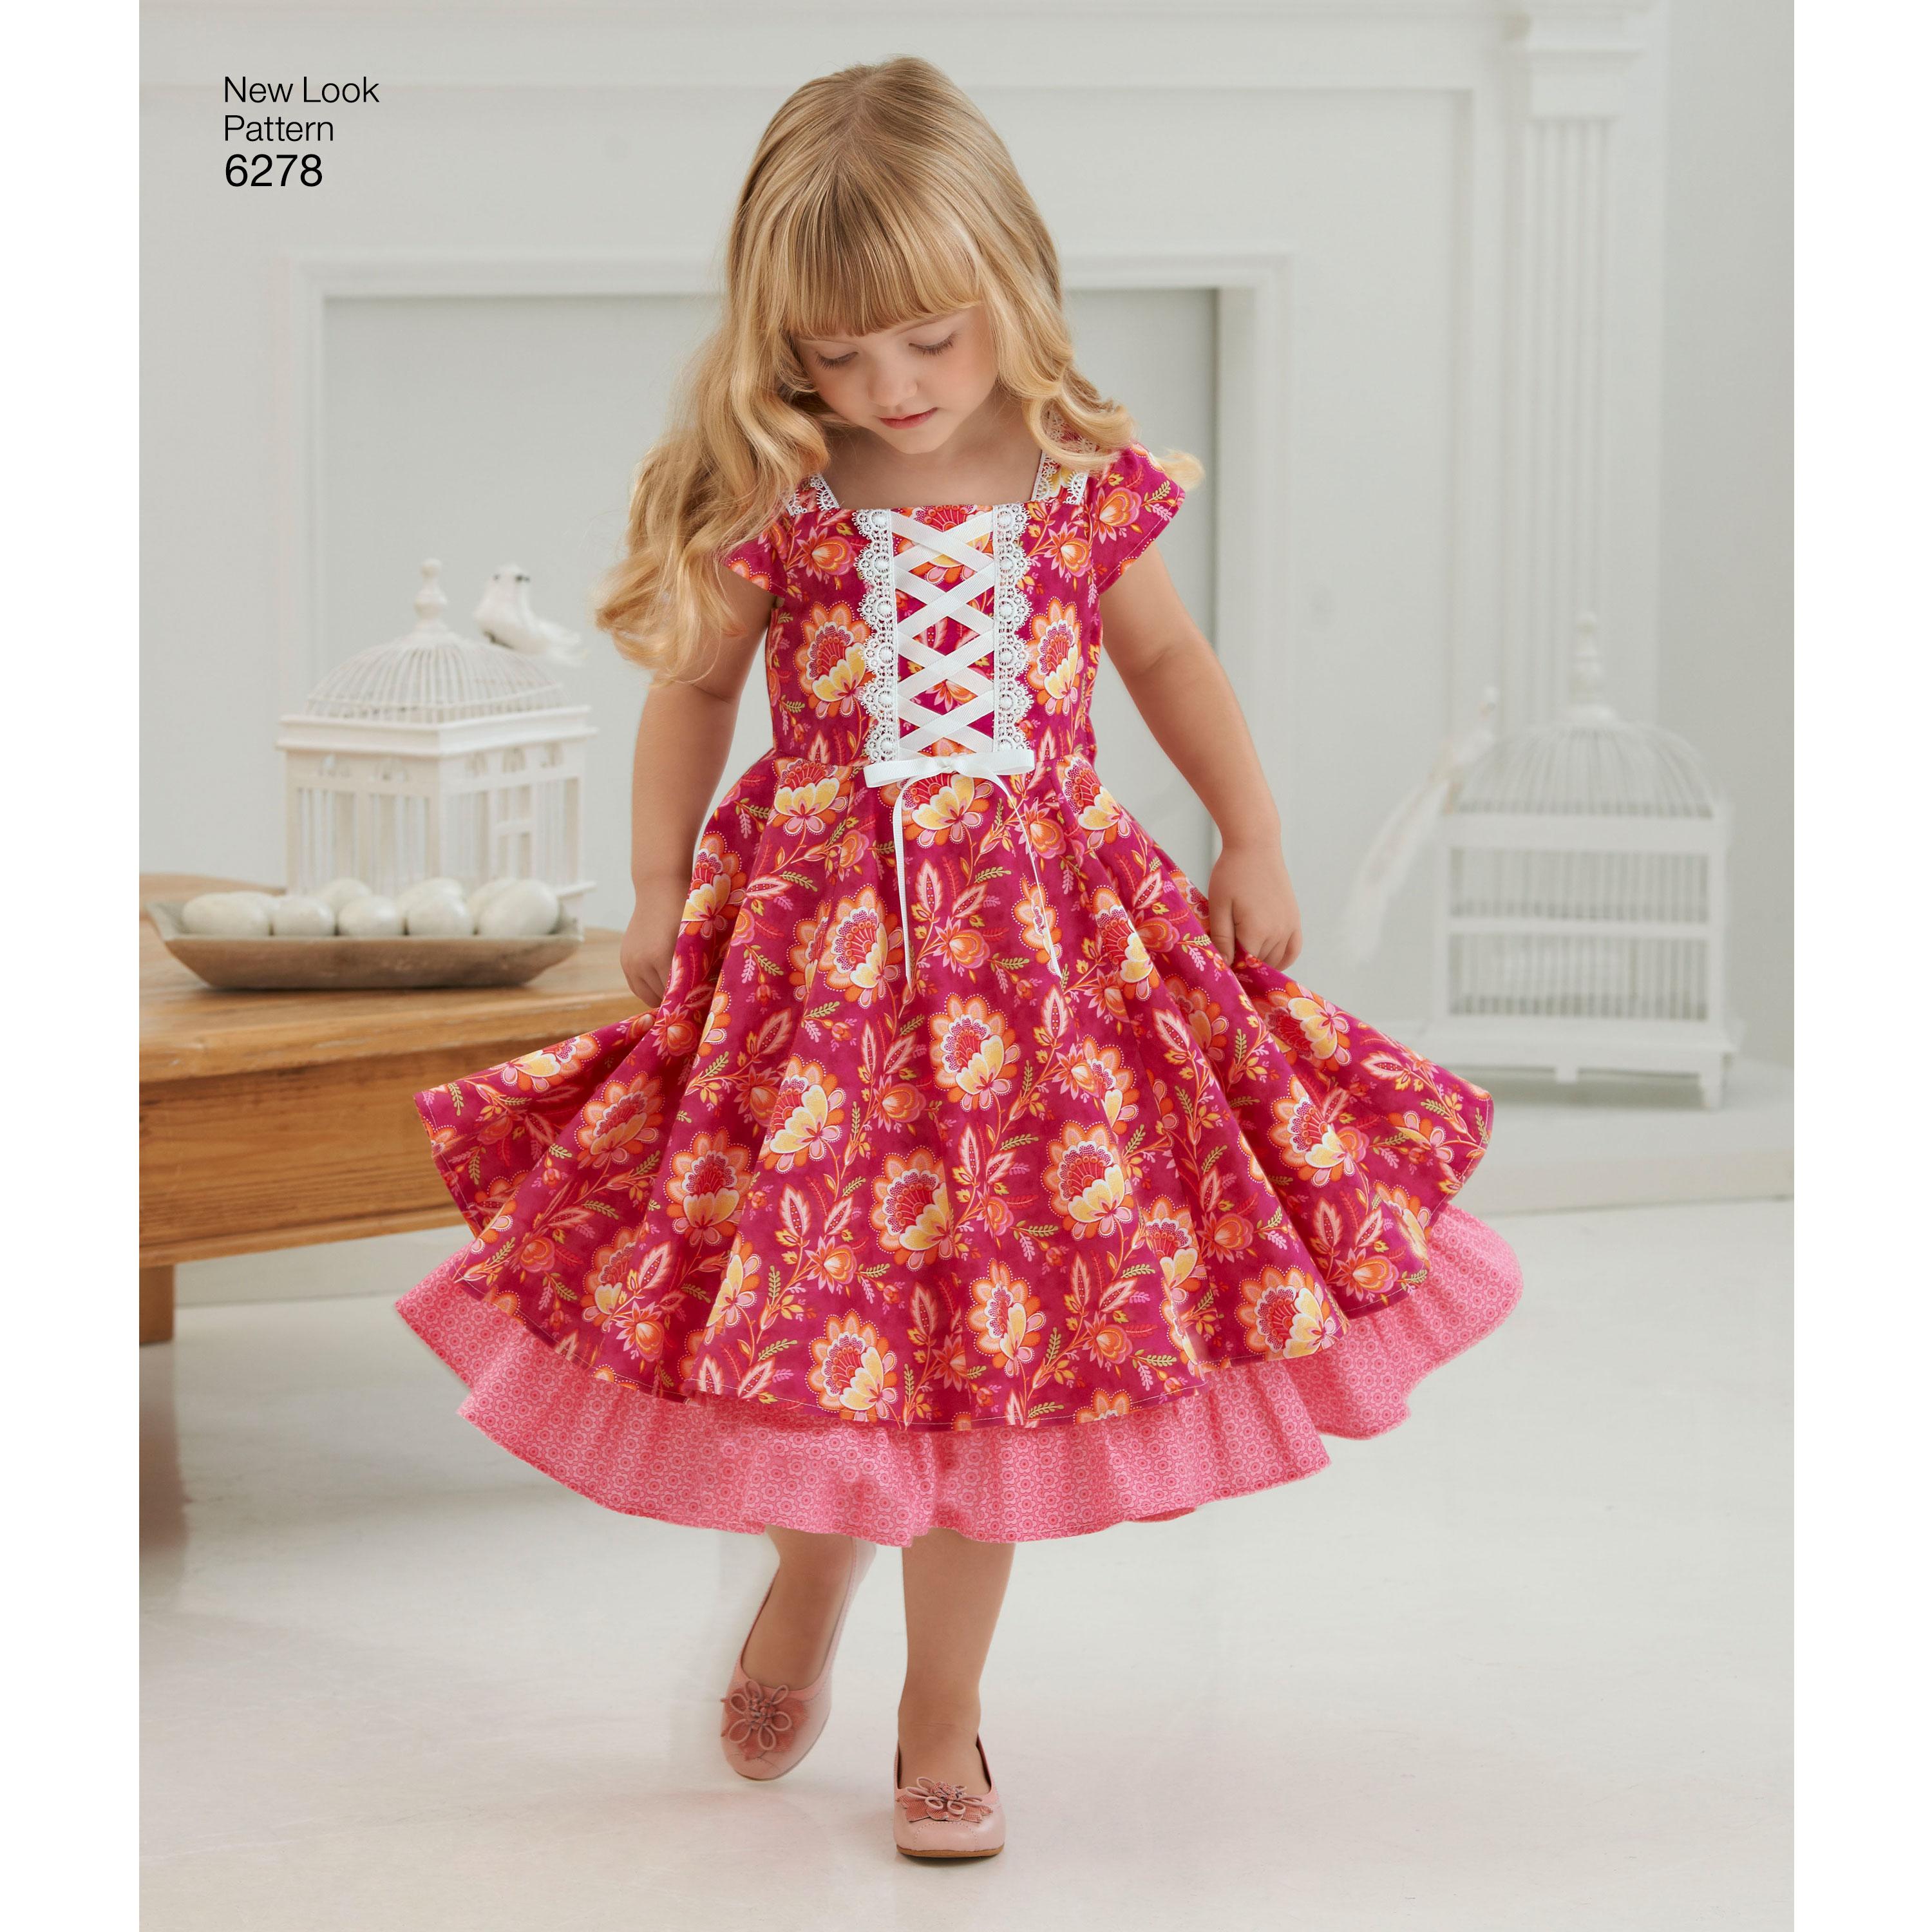 NewLook N6278 Child's Dress with Trim Variations